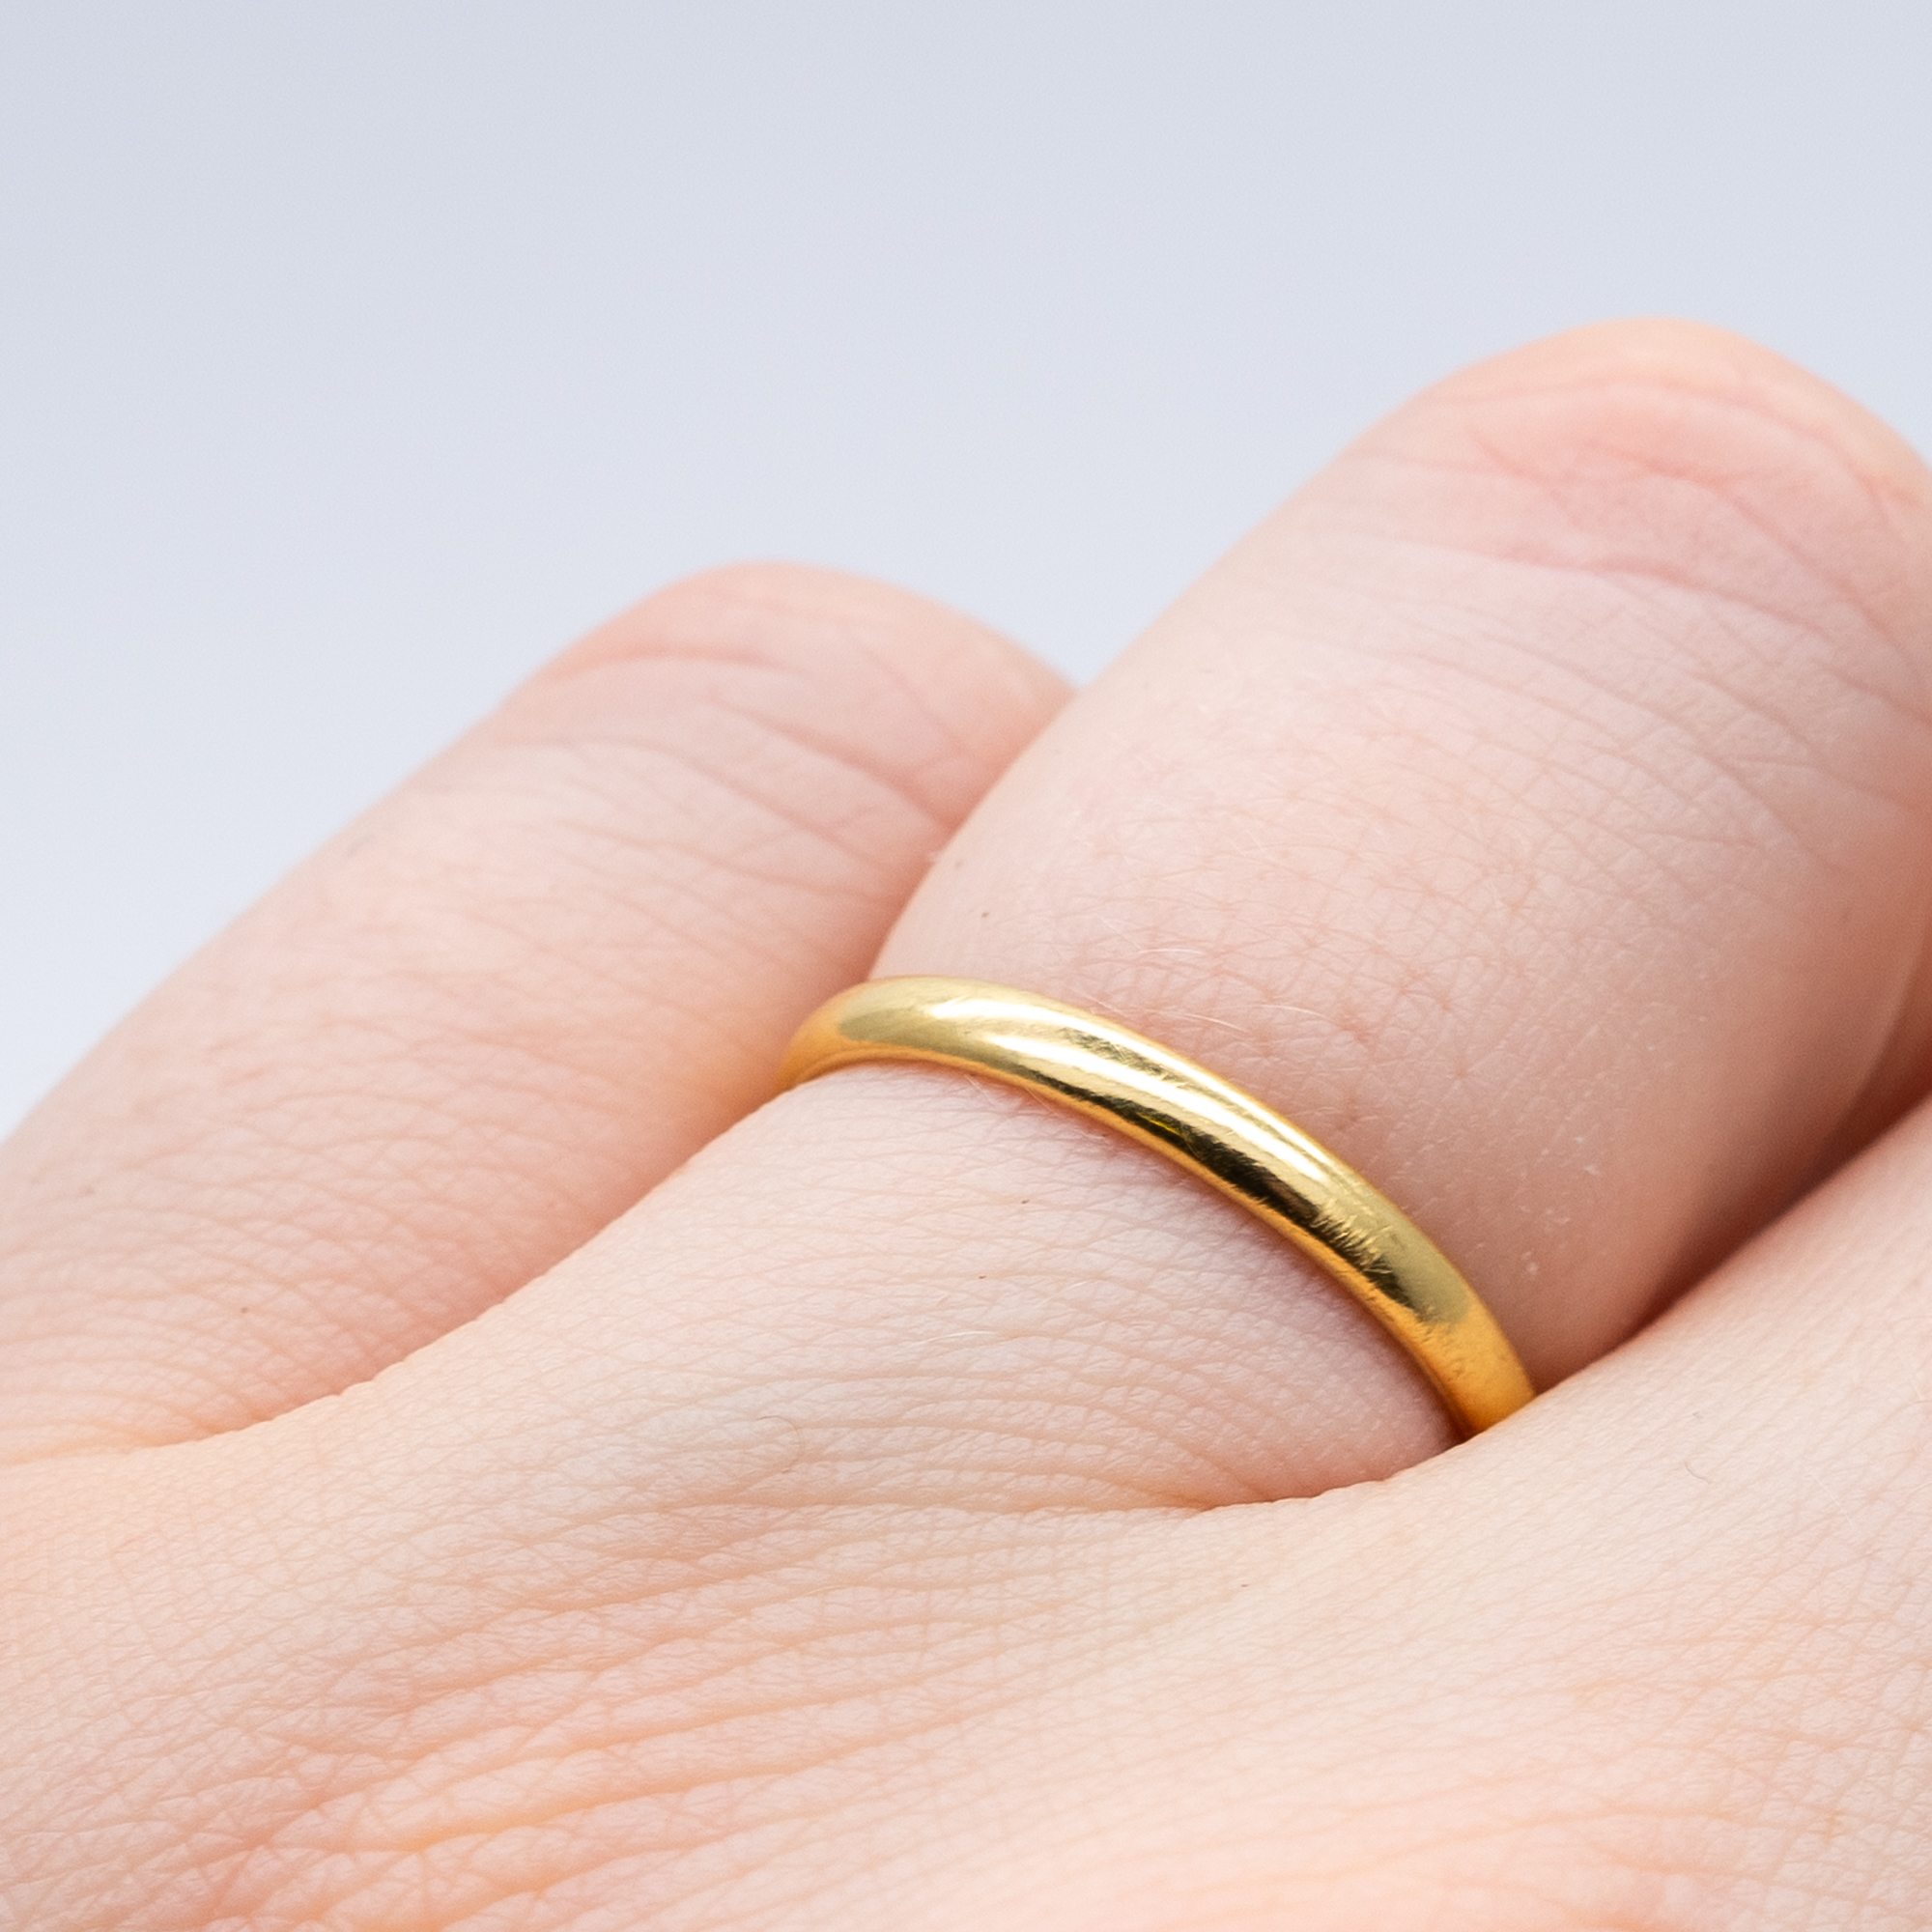 An 18ct yellow gold wedding band - Image 3 of 3